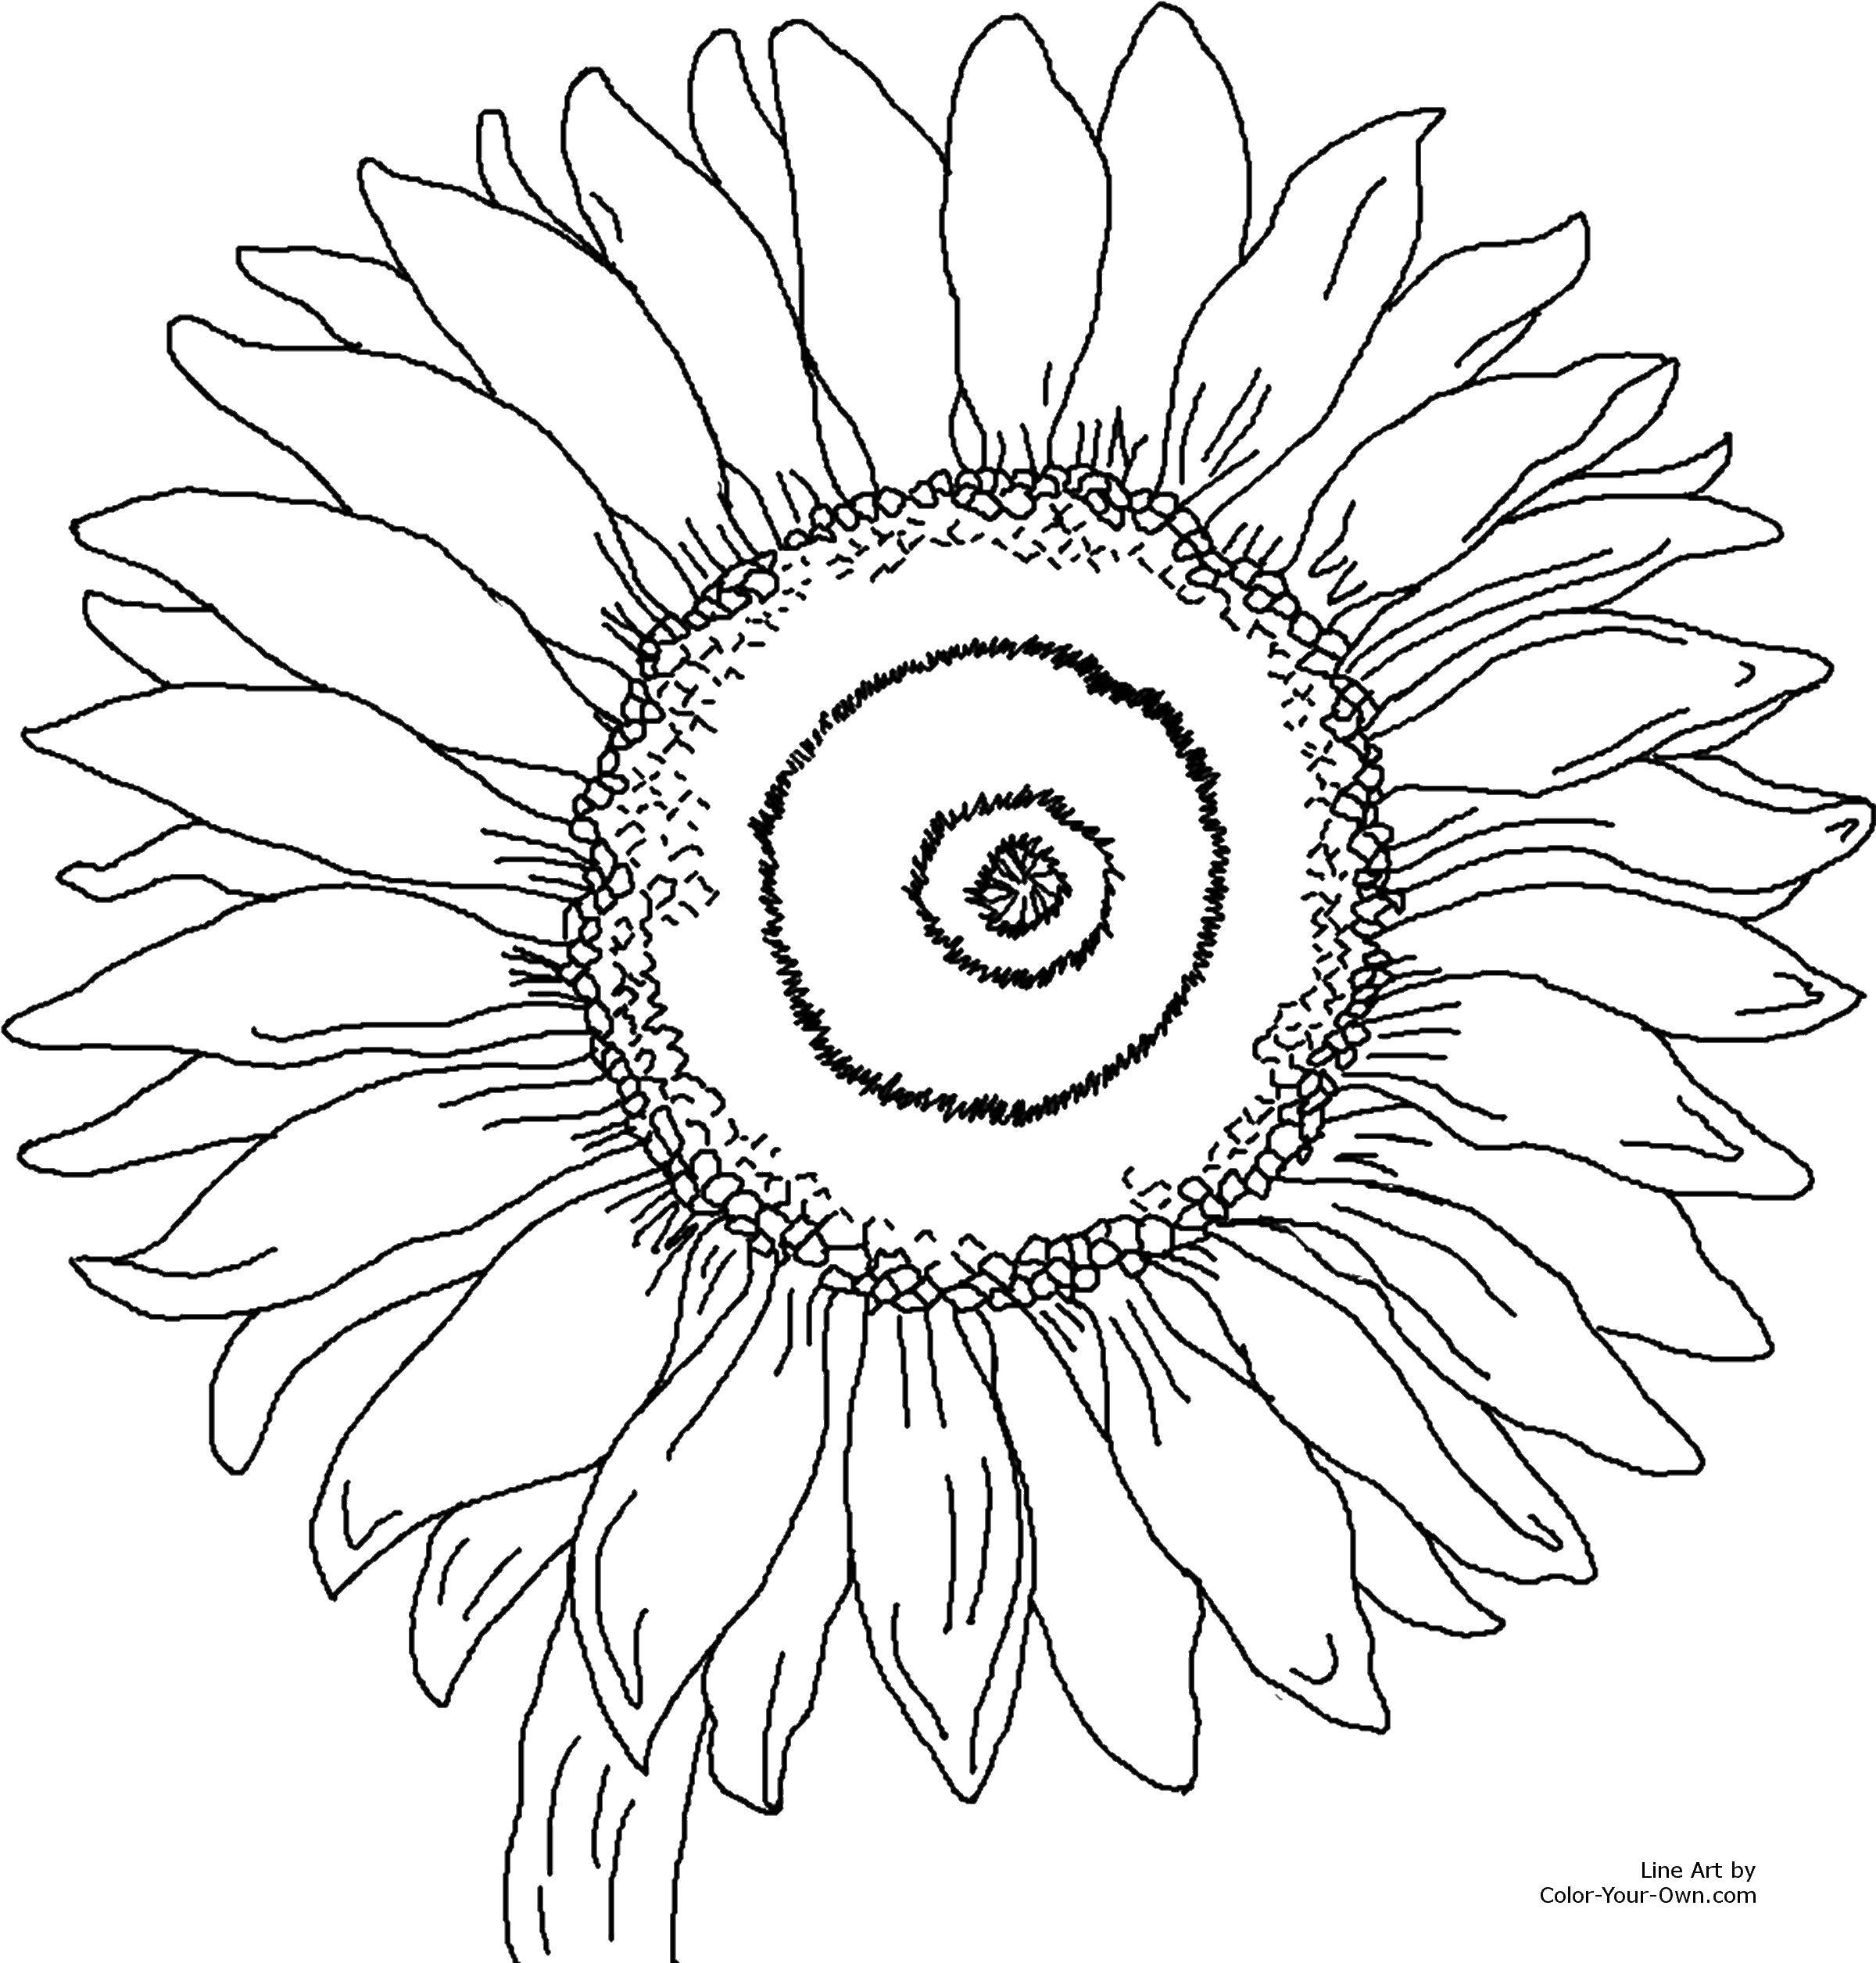 Coloring Flower. Category flowers. Tags:  Flowers.